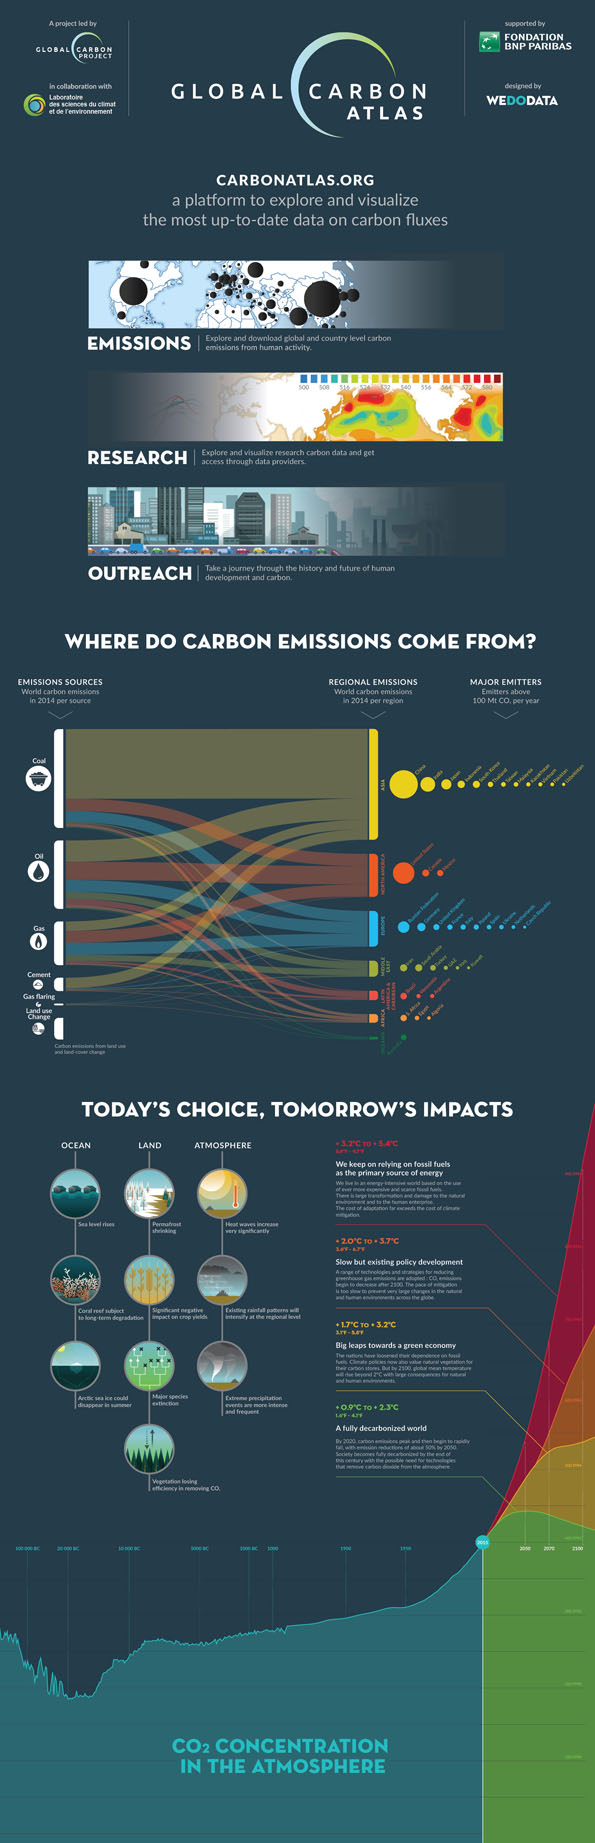 Global Carbon Atlas infographic